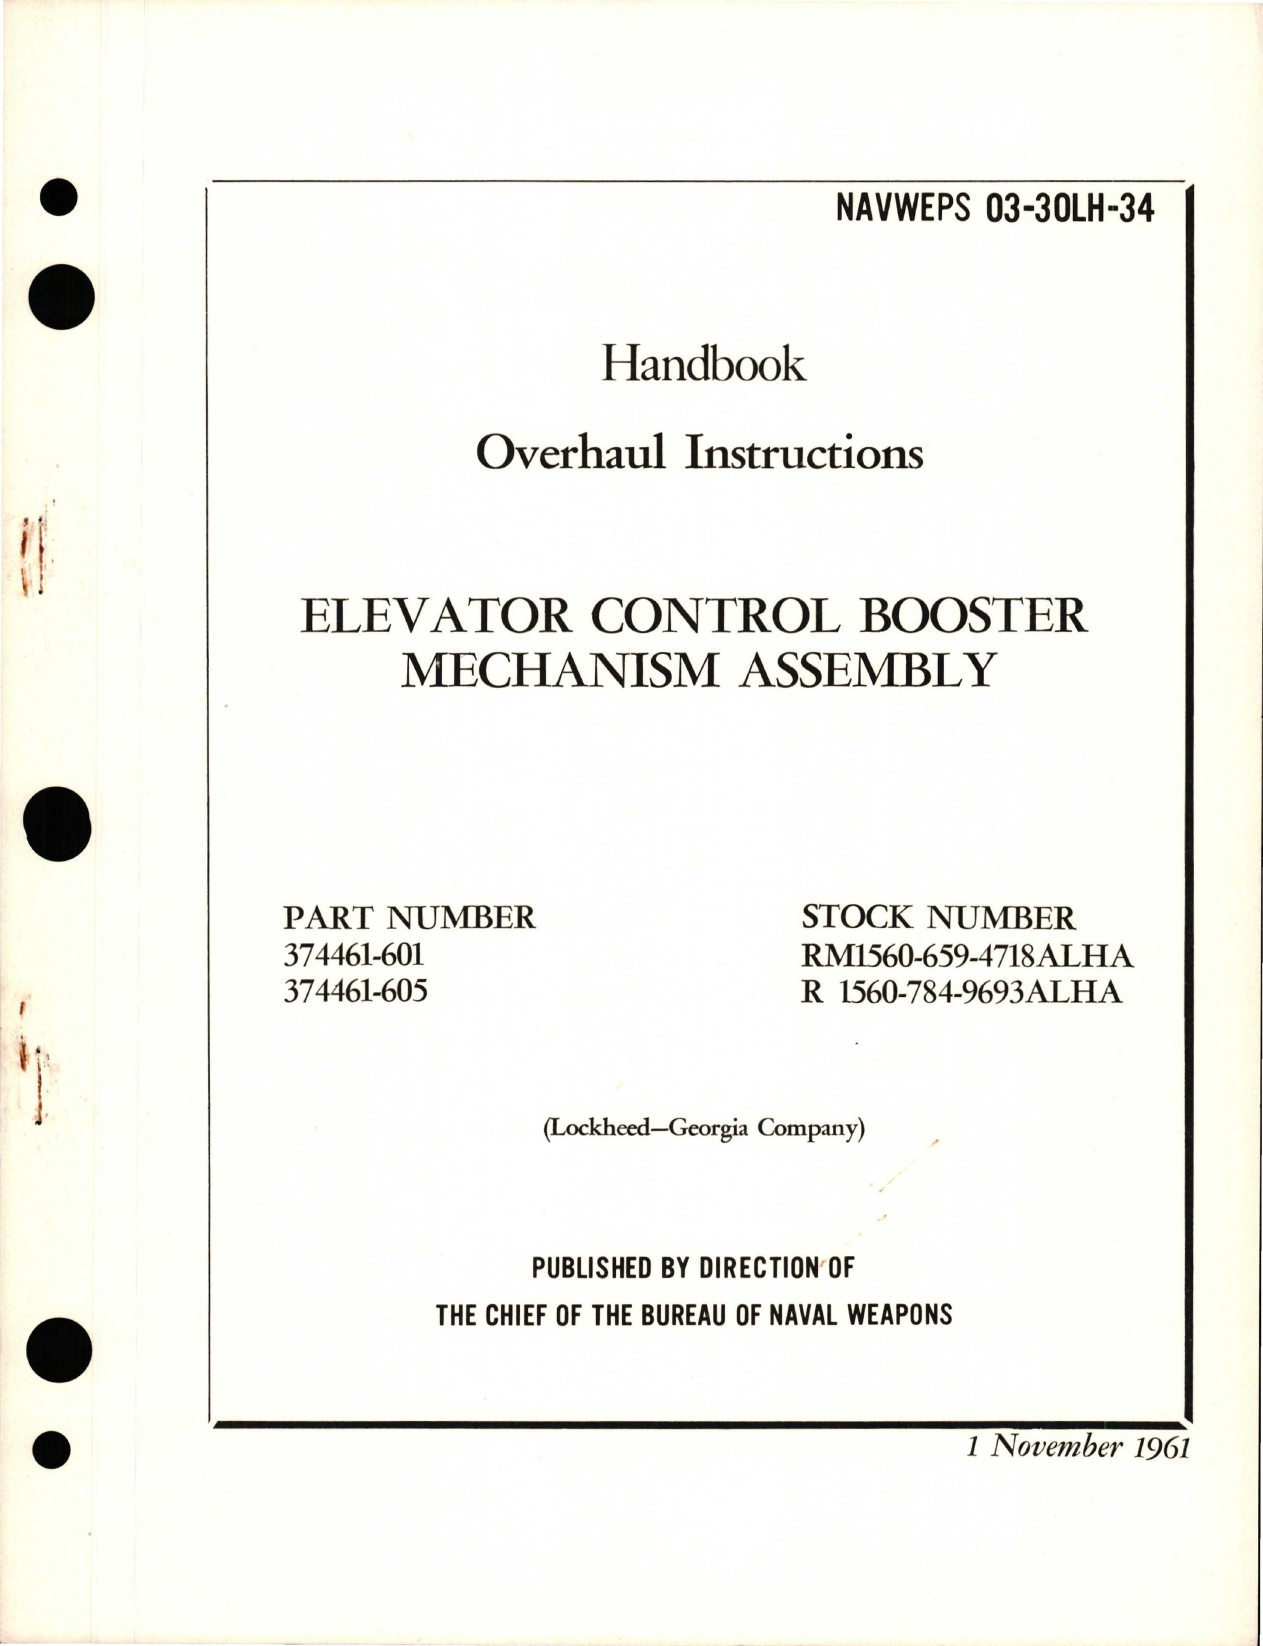 Sample page 1 from AirCorps Library document: Overhaul Instructions for Elevator Control Booster Mechanism Assembly - Parts 374461-601 and 374461-605 